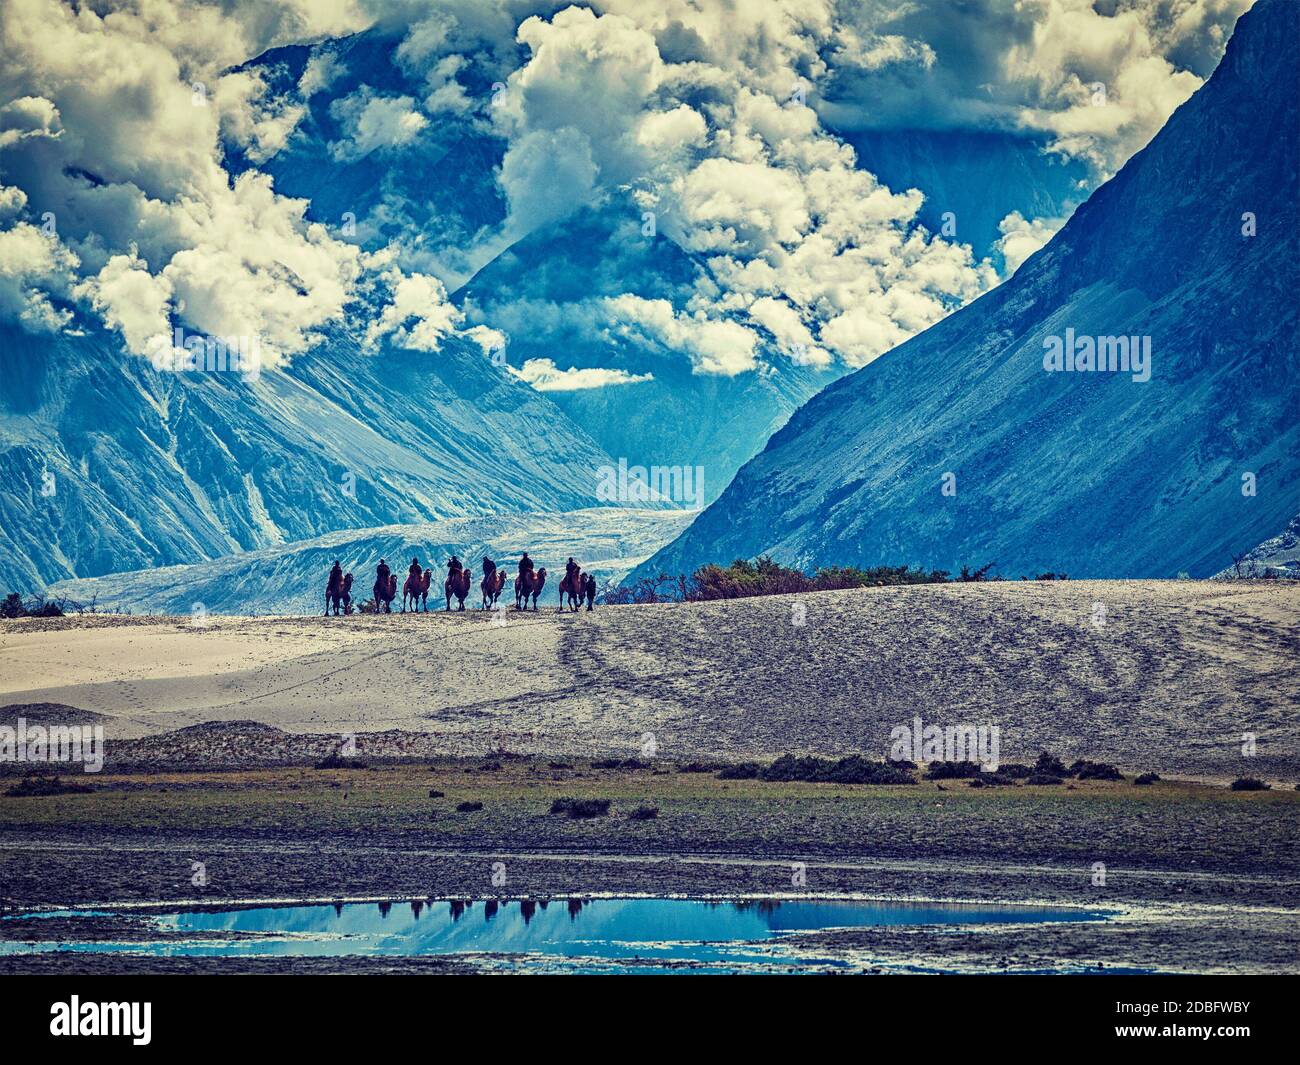 Vintage retro effect filtered hipster style image of Tourists riding camels in Nubra valley in Himalayas, Ladakh Stock Photo